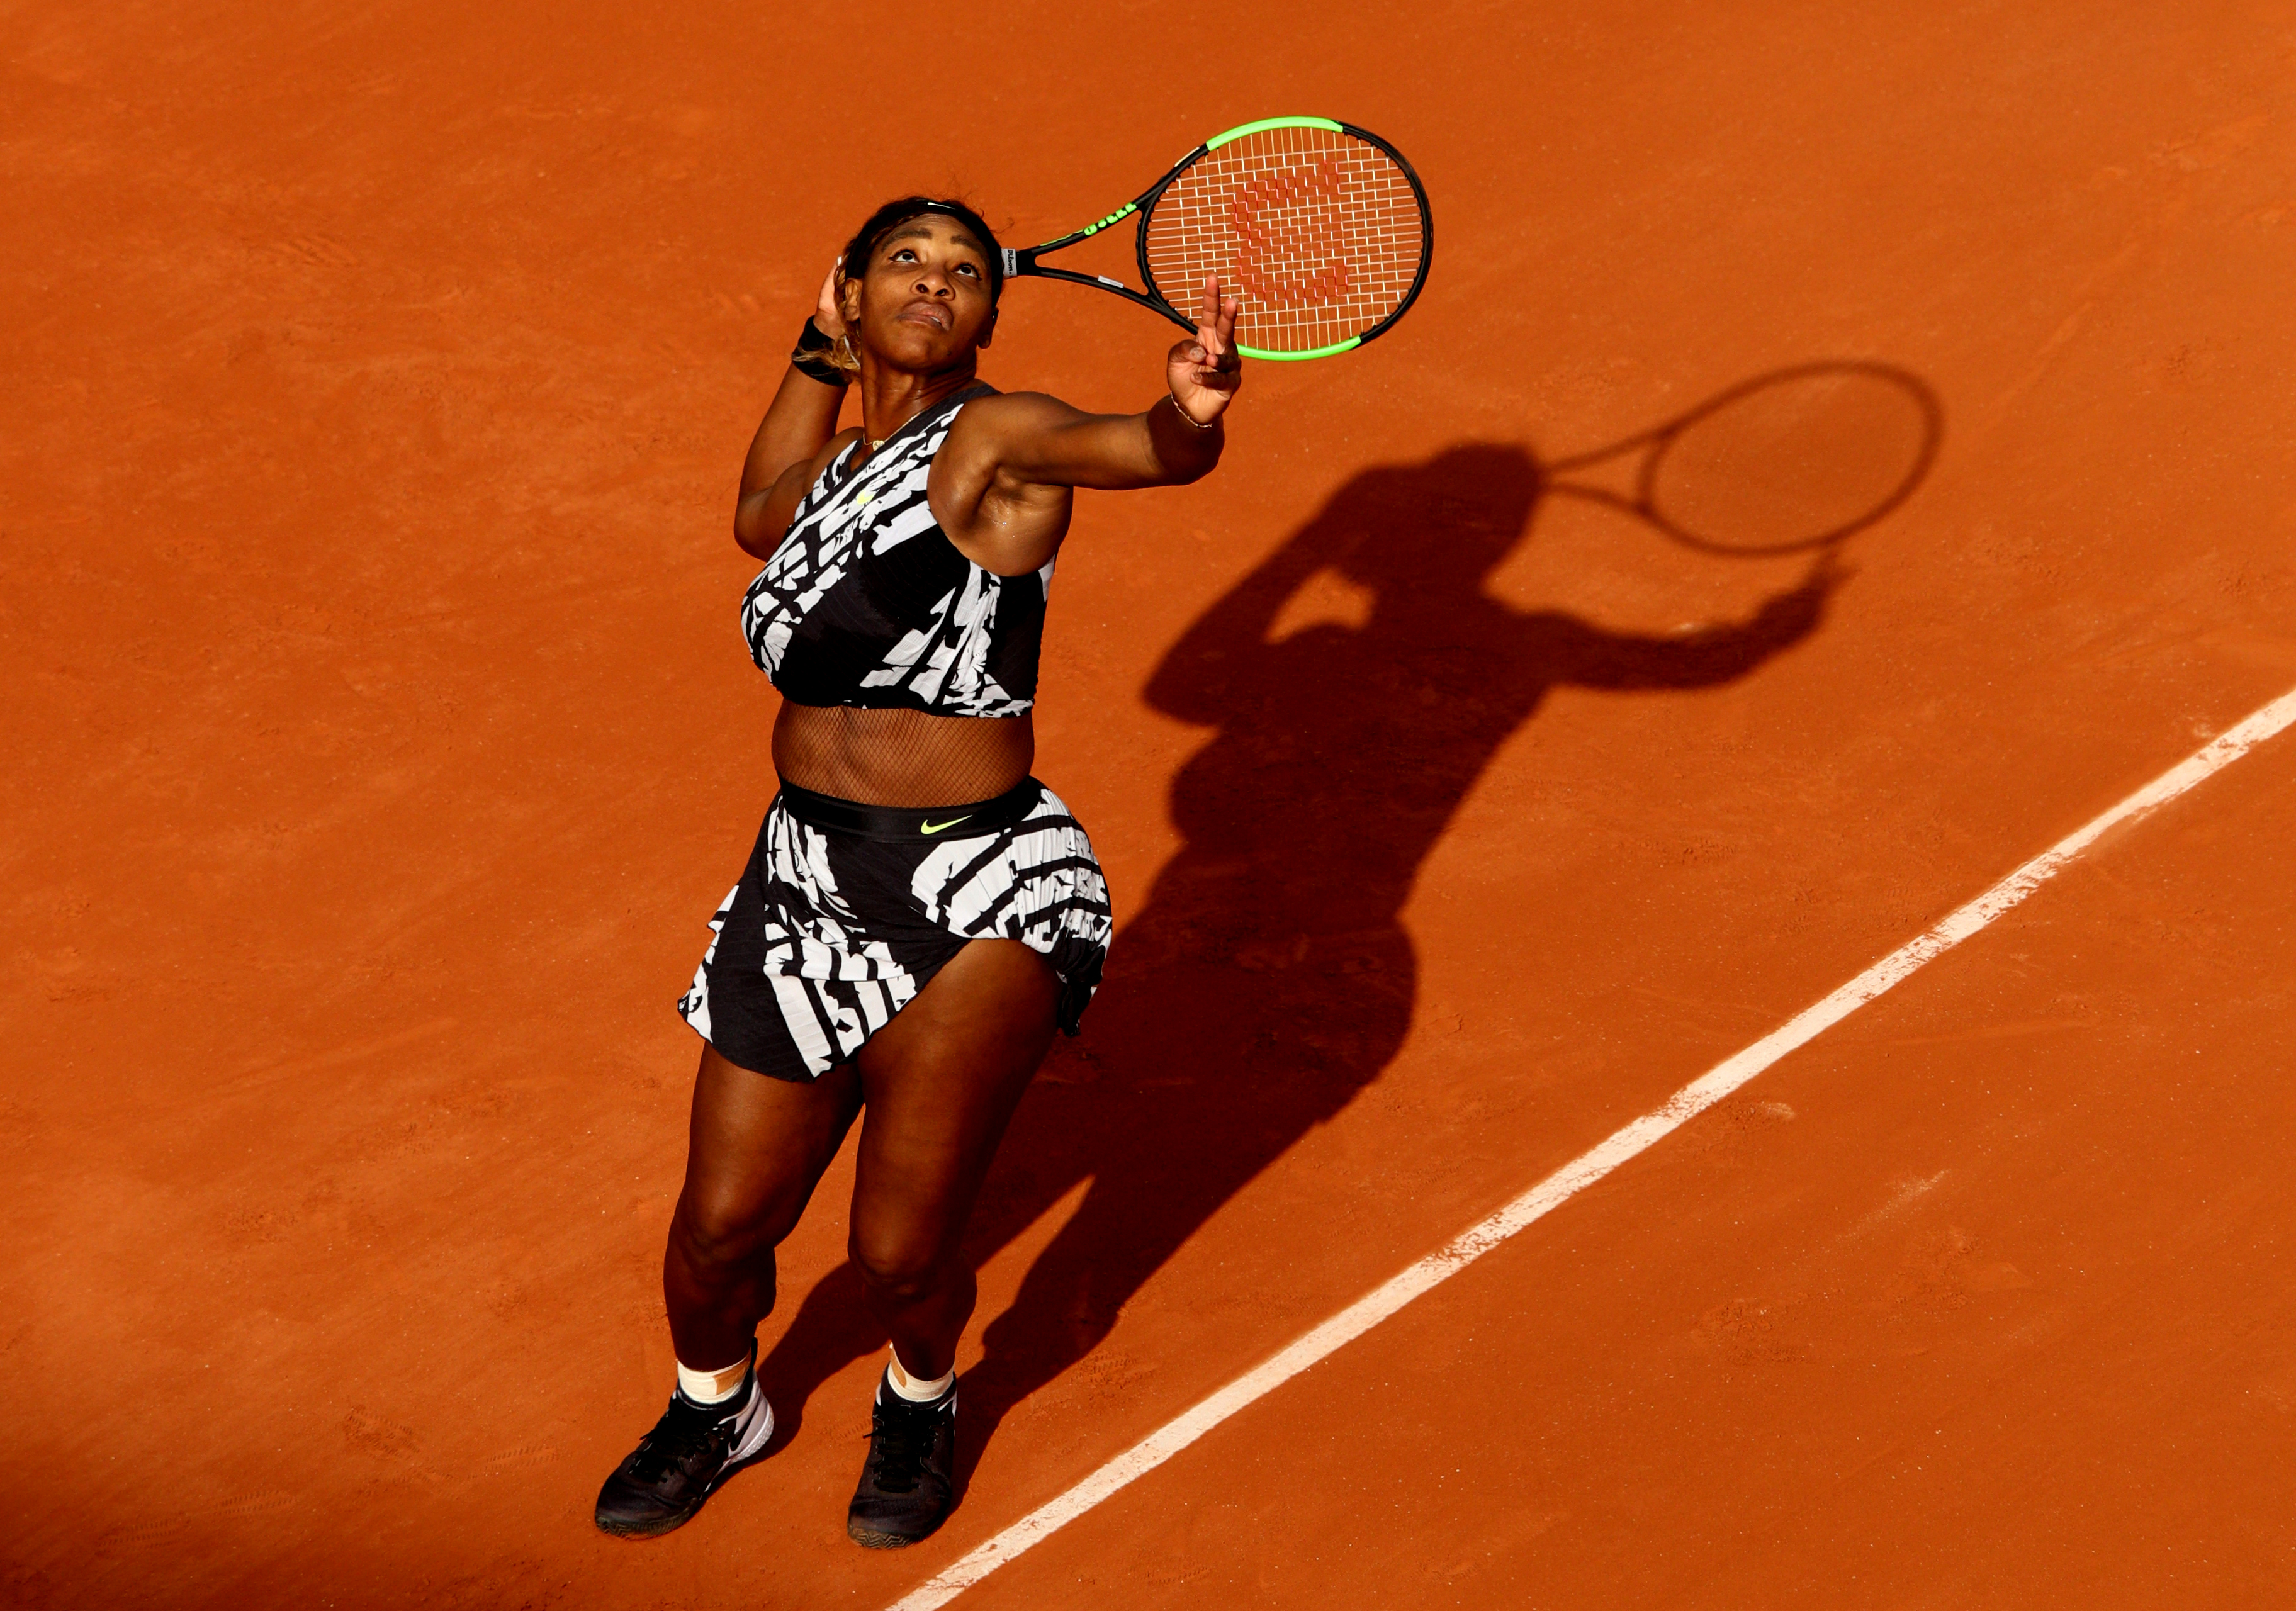 Serena Williams Wins First Round of French Open in Cape Outfit Designed by Virgil  Abloh – Fashion Bomb Daily